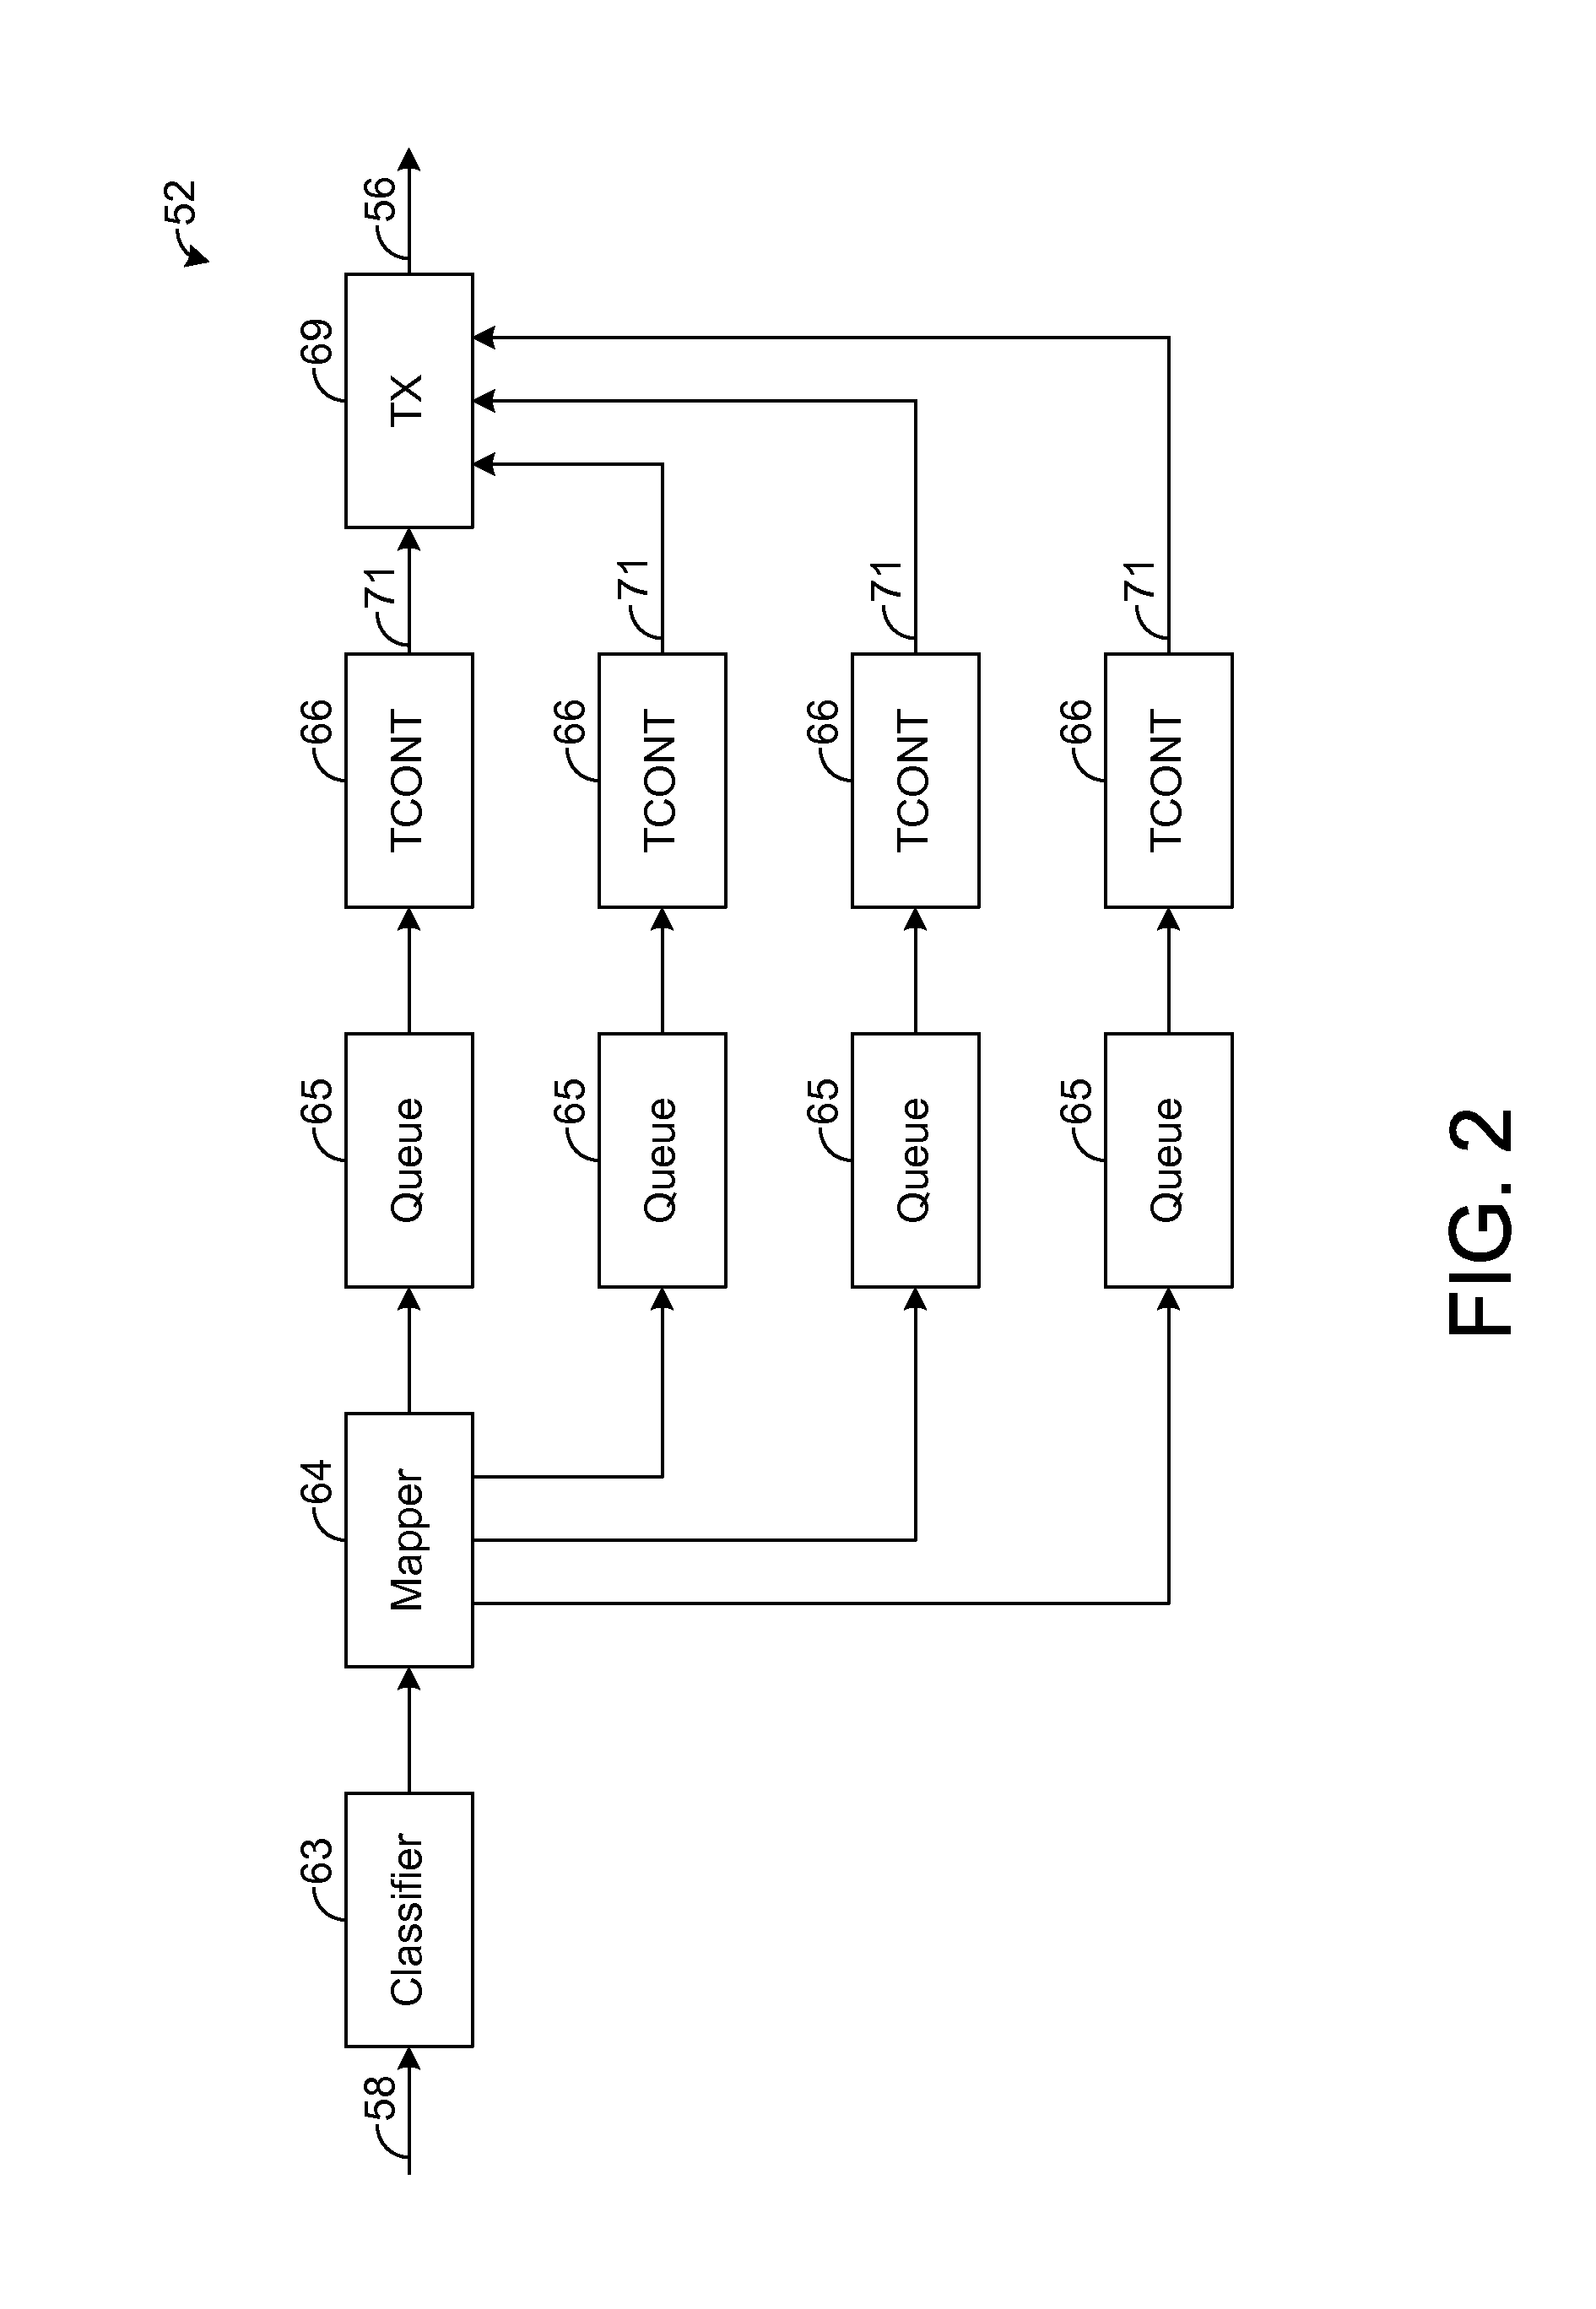 Systems and methods for scheduling business and residential services in optical networks